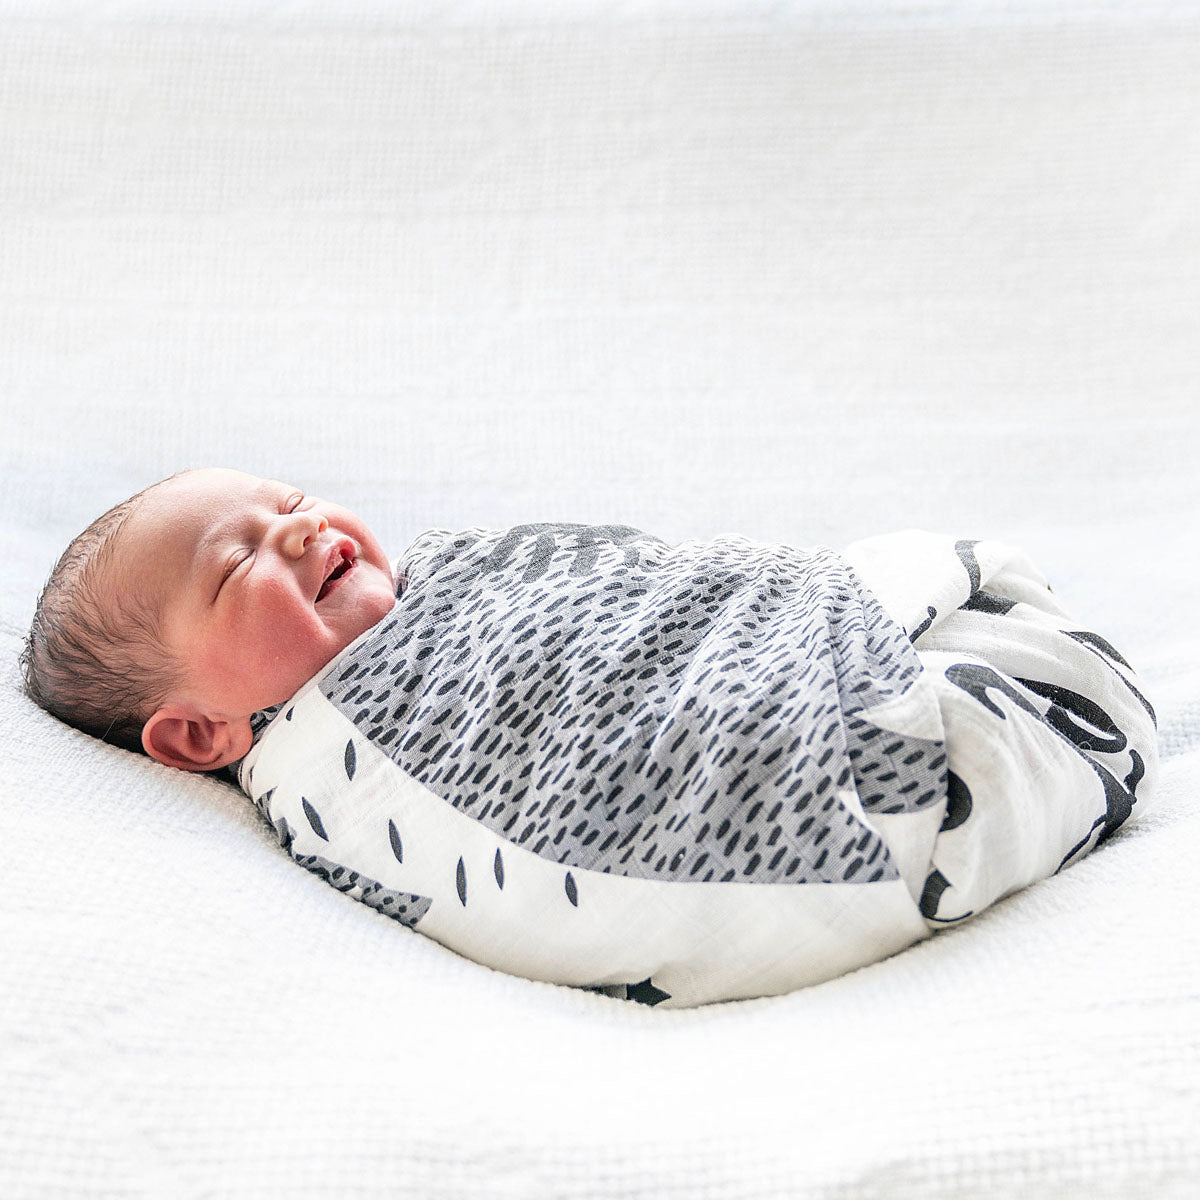 Newborn baby wrapped like a burrito with Lil Be Swaddle blanket